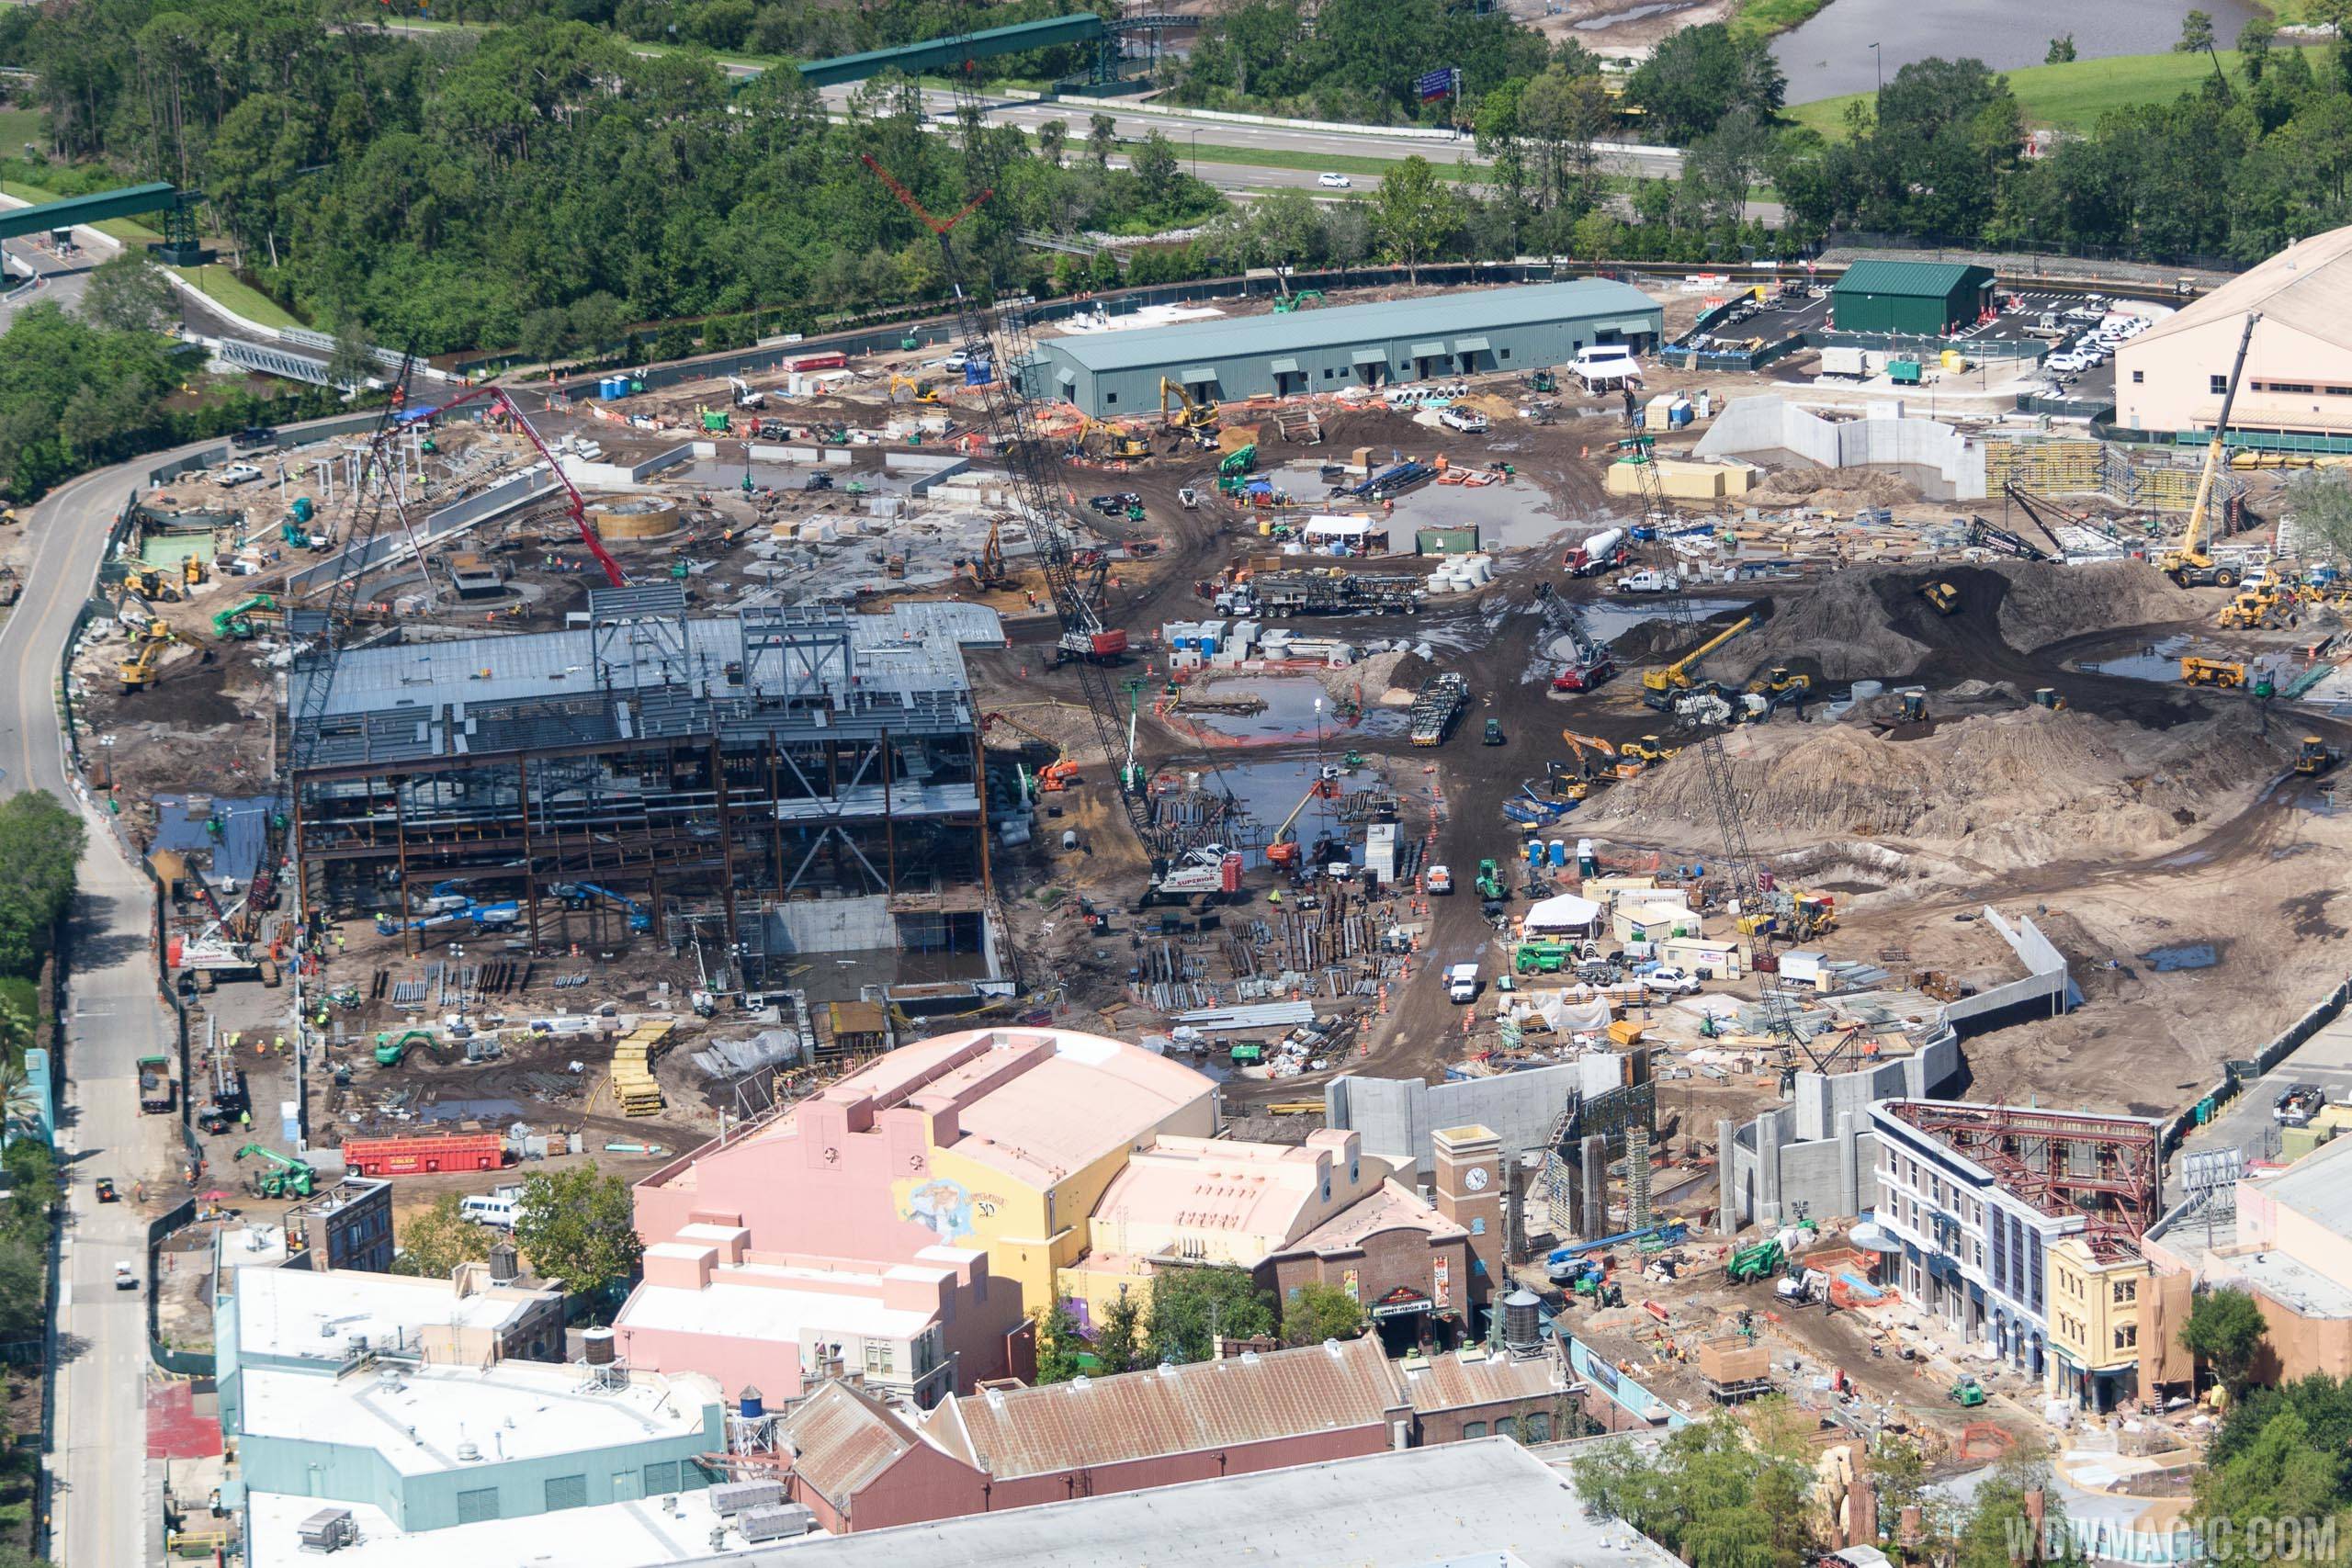 PHOTOS - Star Wars Galaxy's Edge construction from the air